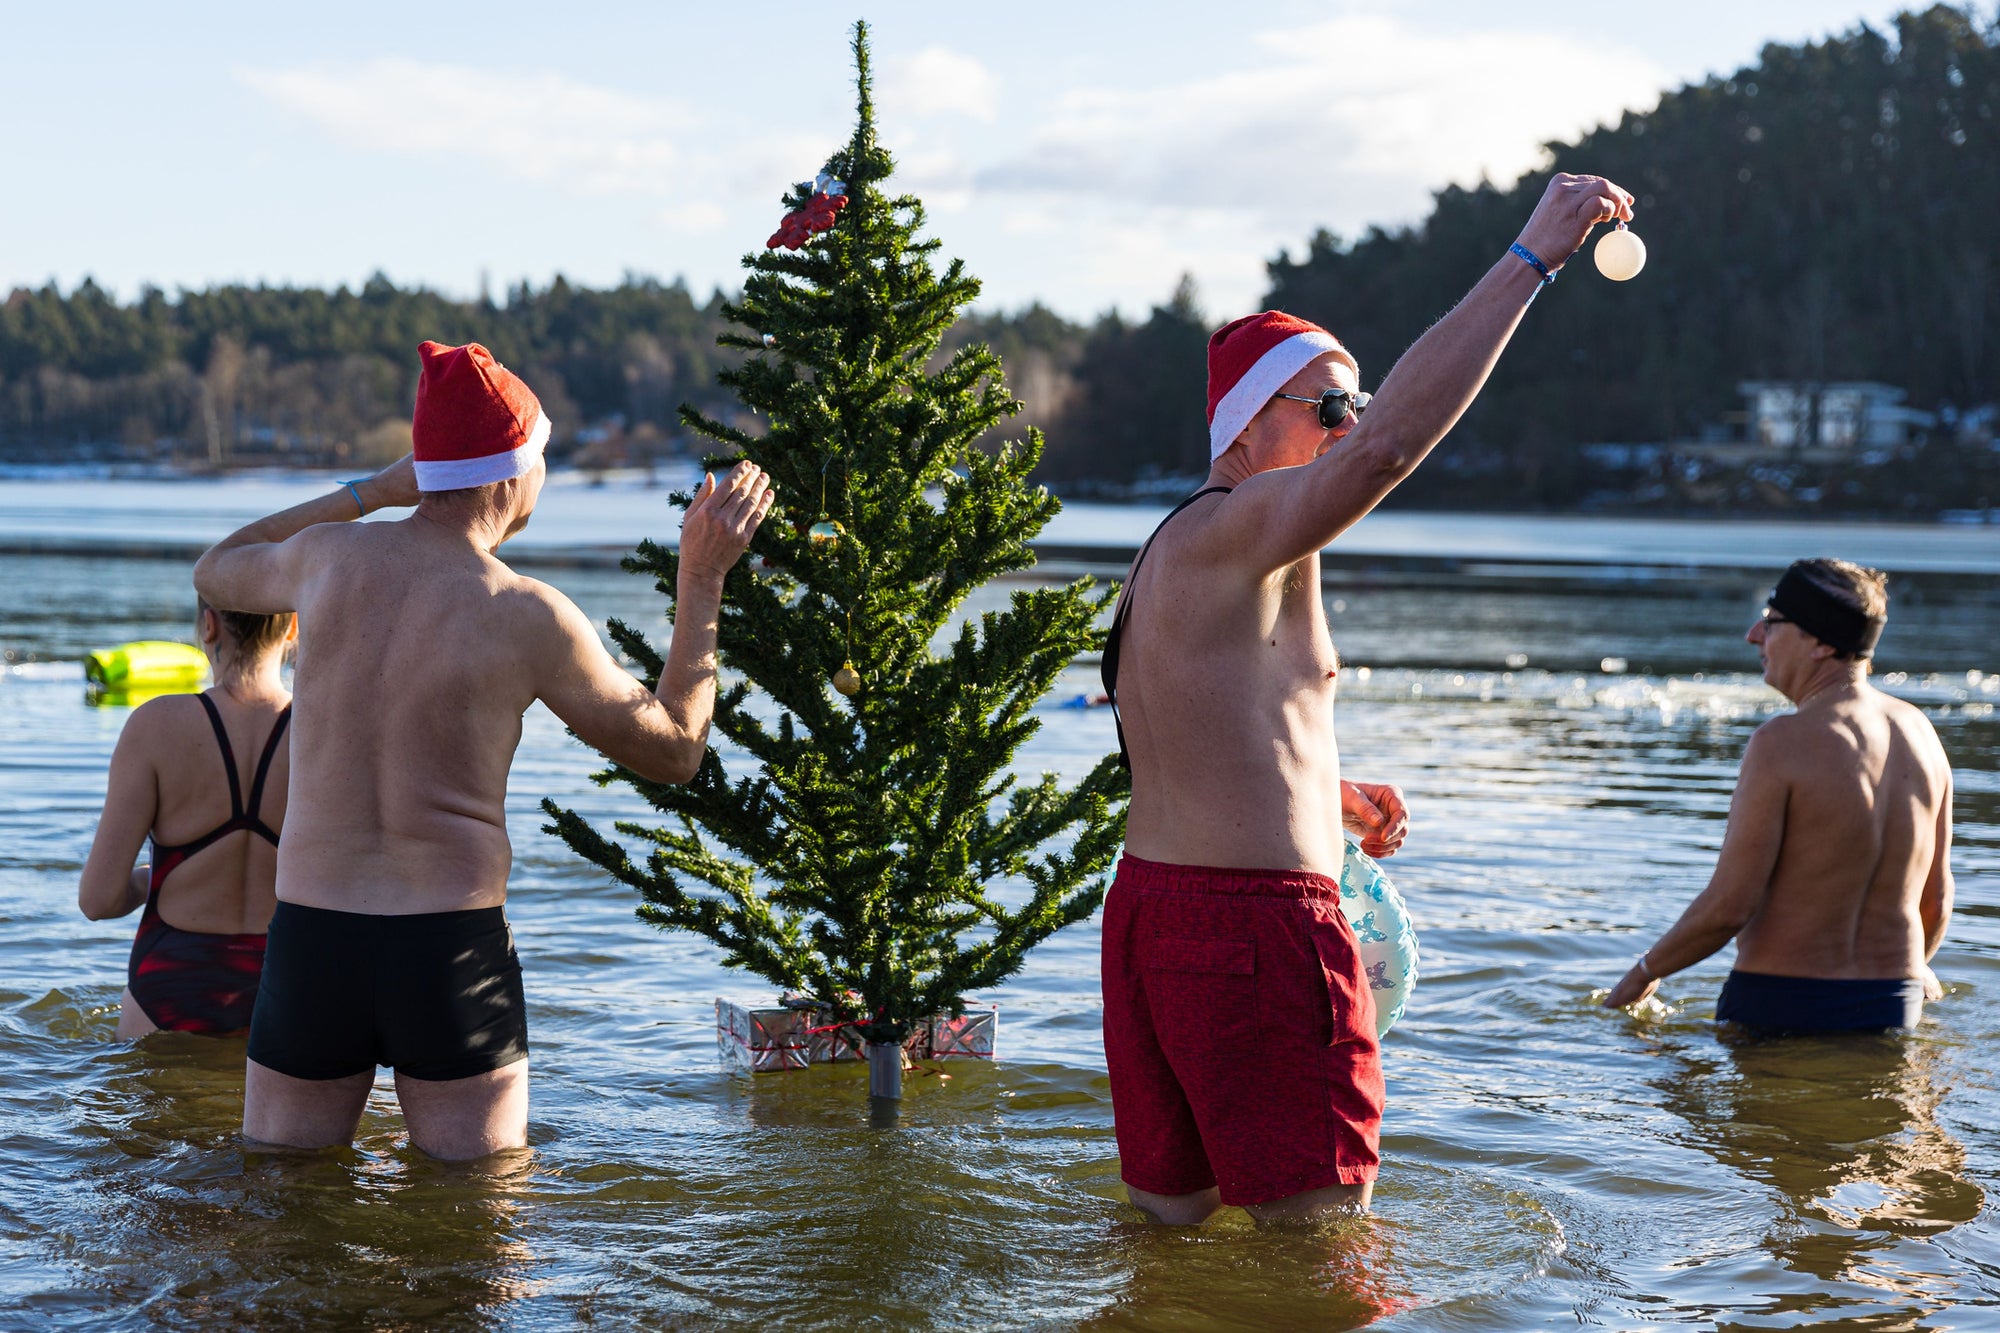 A group of people swimming in Christmas hats